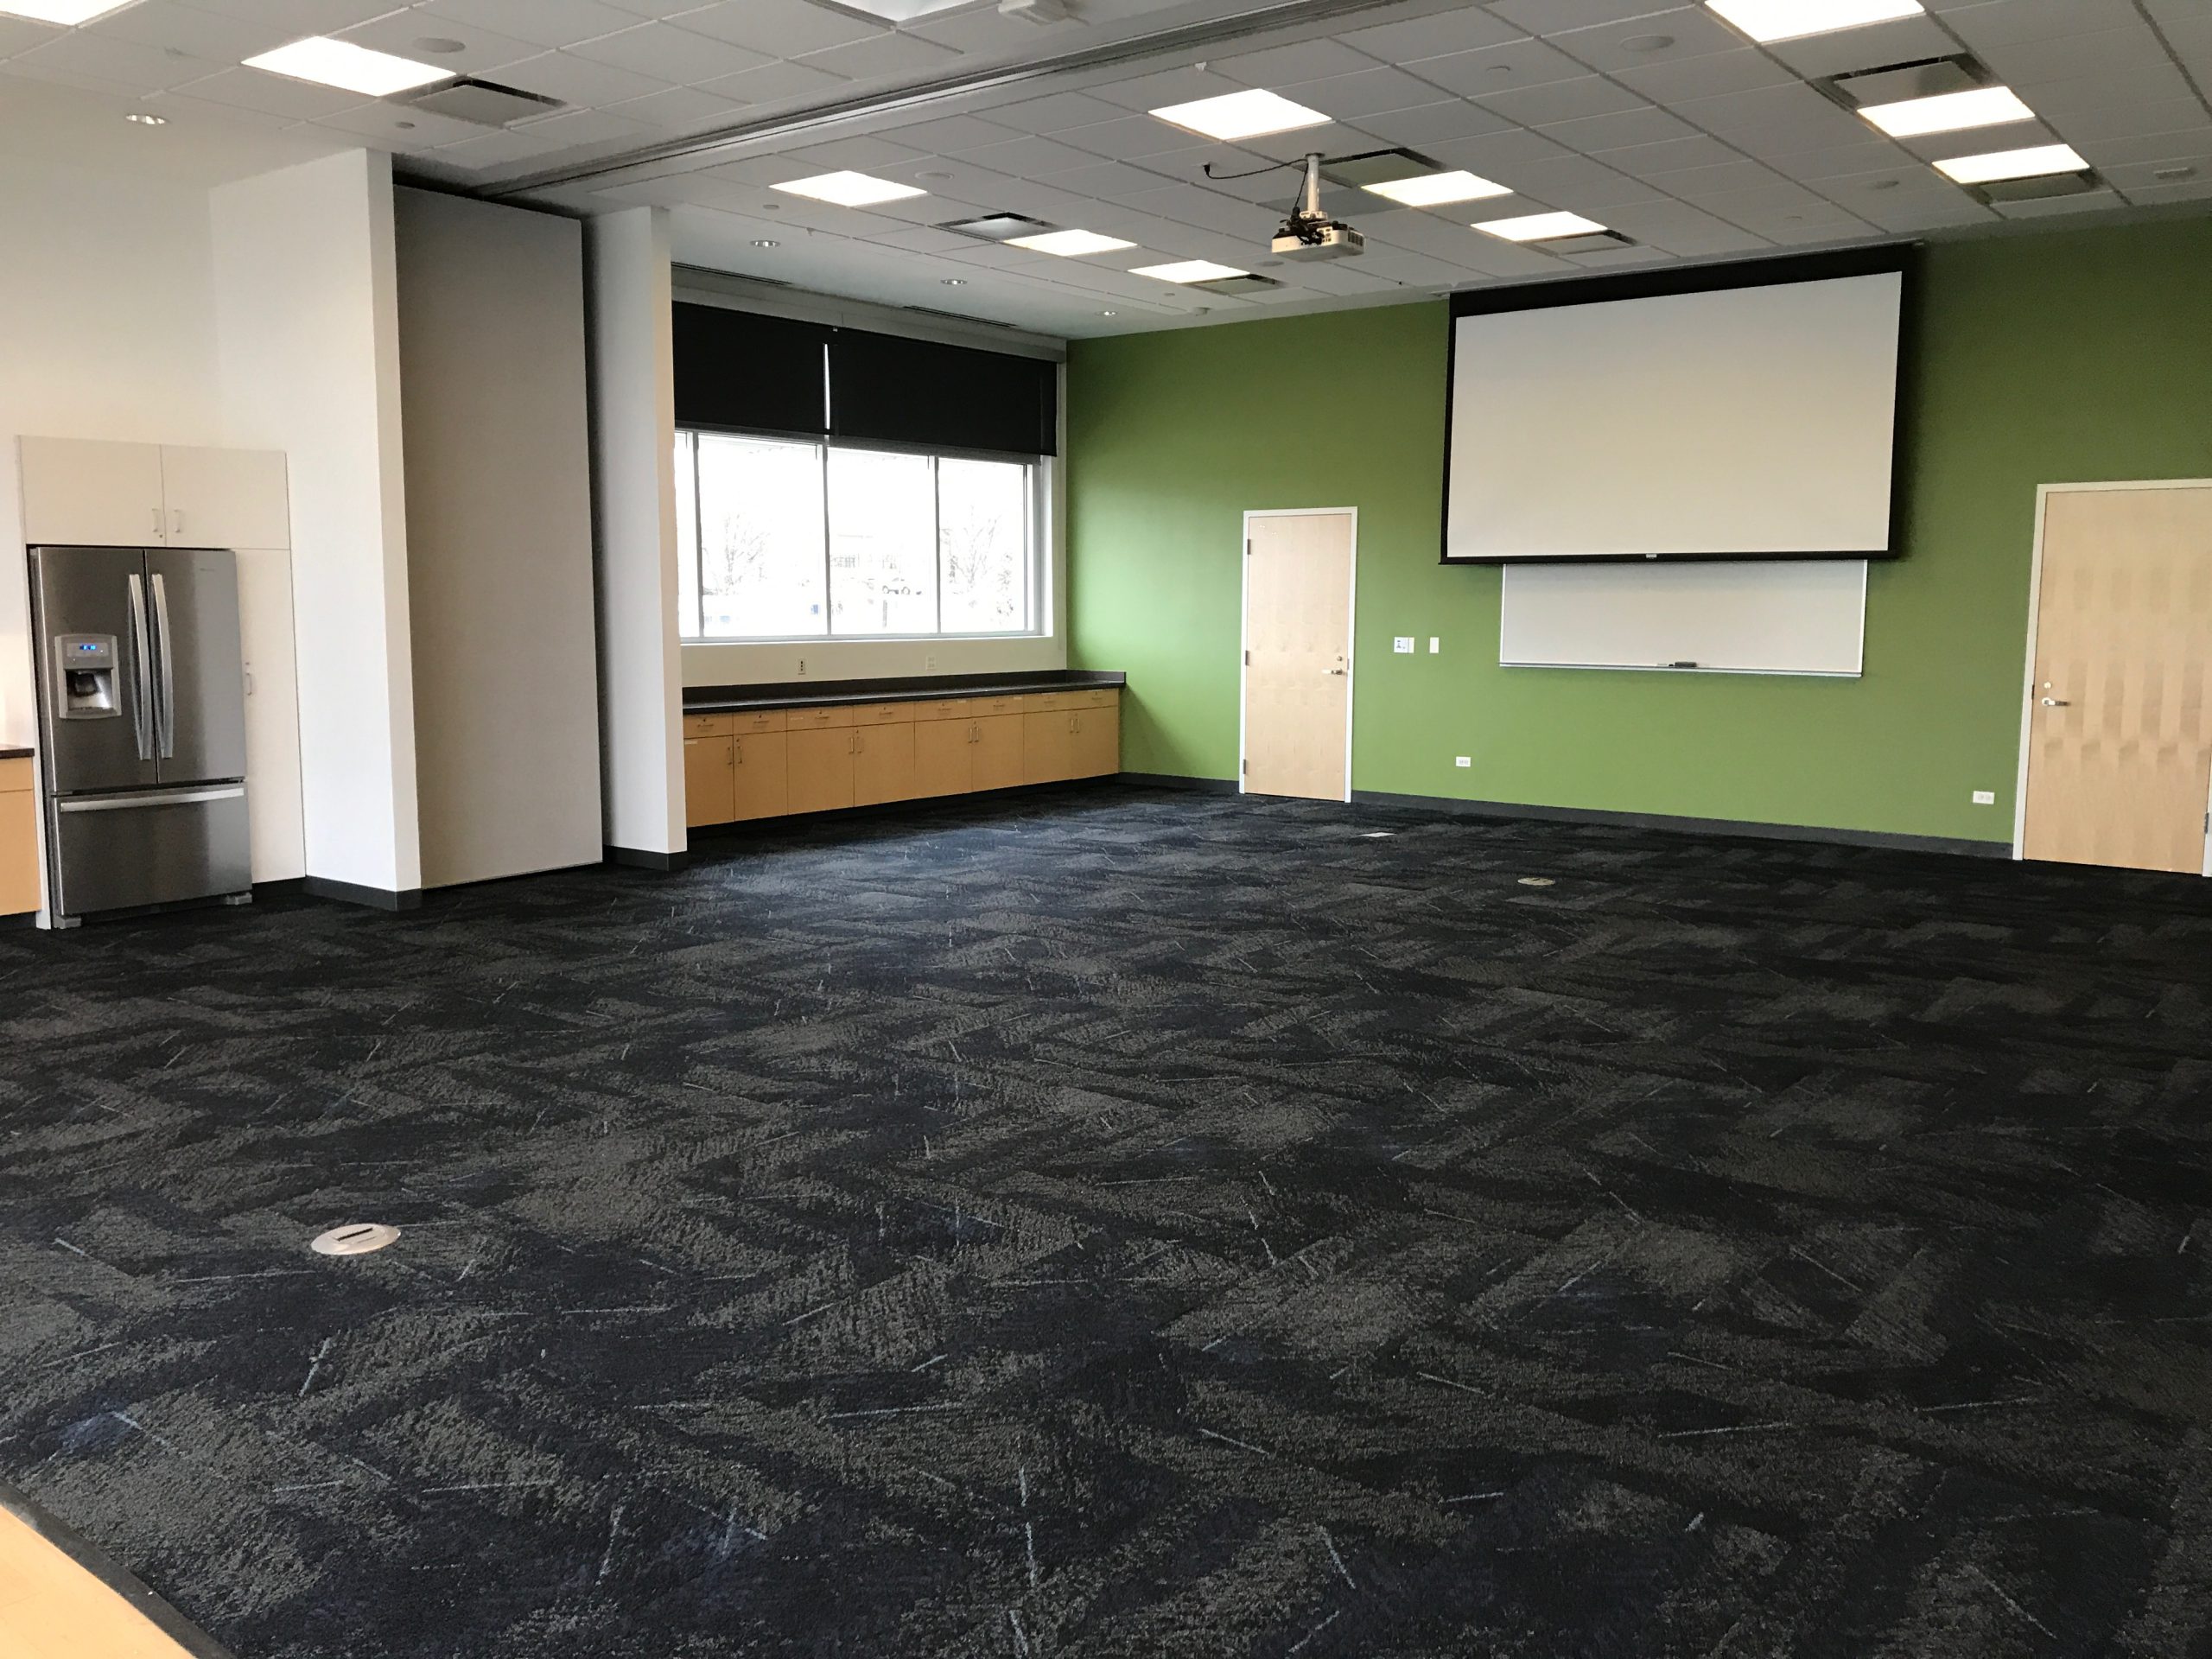 Image of the Aspen Drive meeting room, project screen is down at end of room.